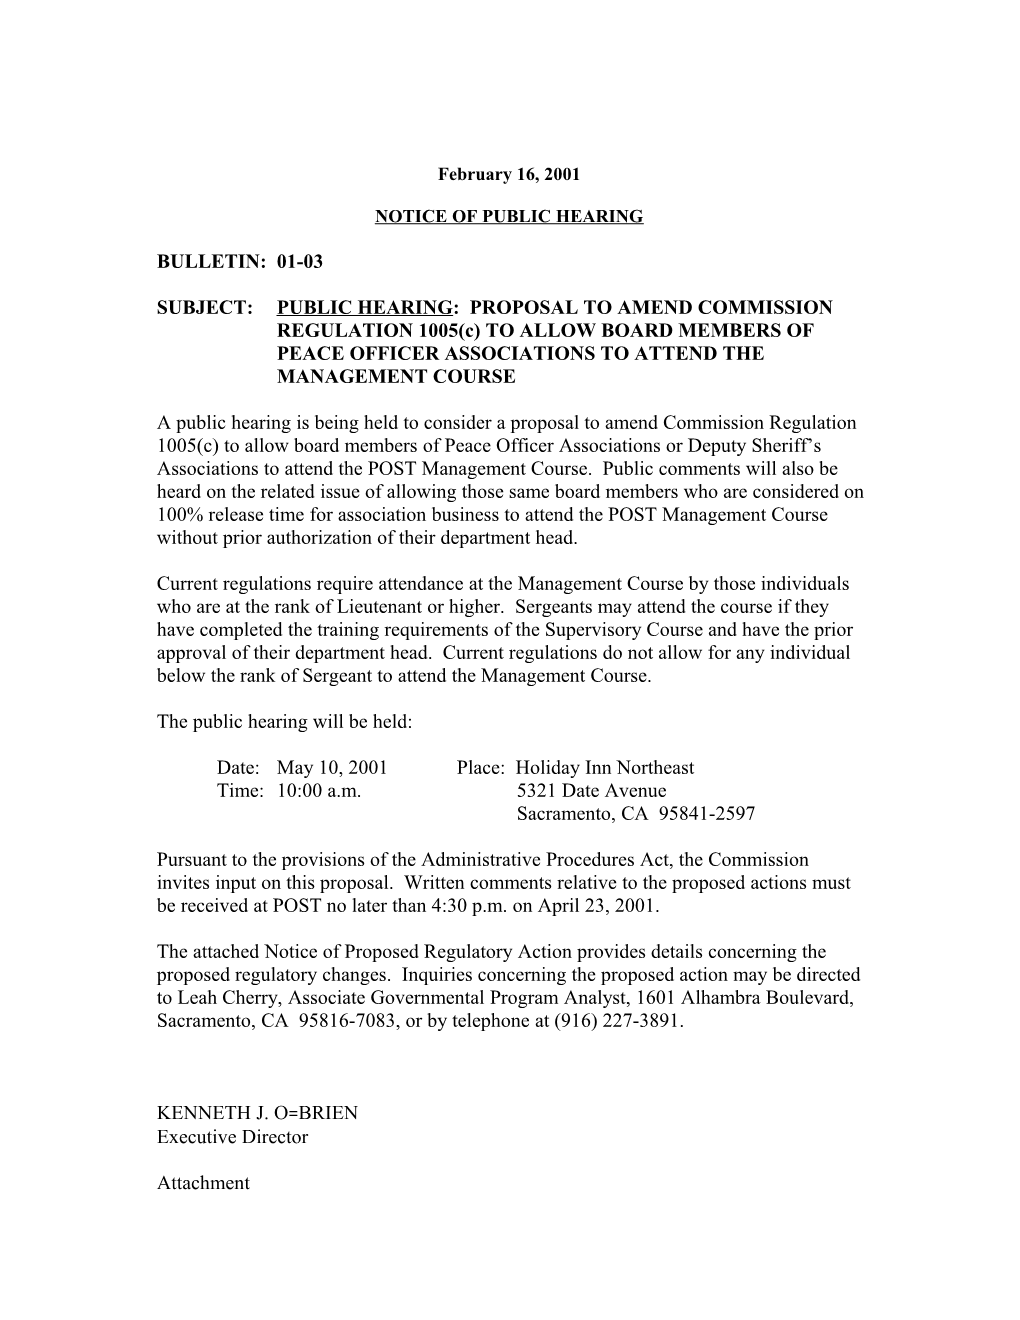 SUBJECT:PUBLIC HEARING: PROPOSAL to AMEND COMMISSION REGULATION 1005(C) to ALLOW BOARD